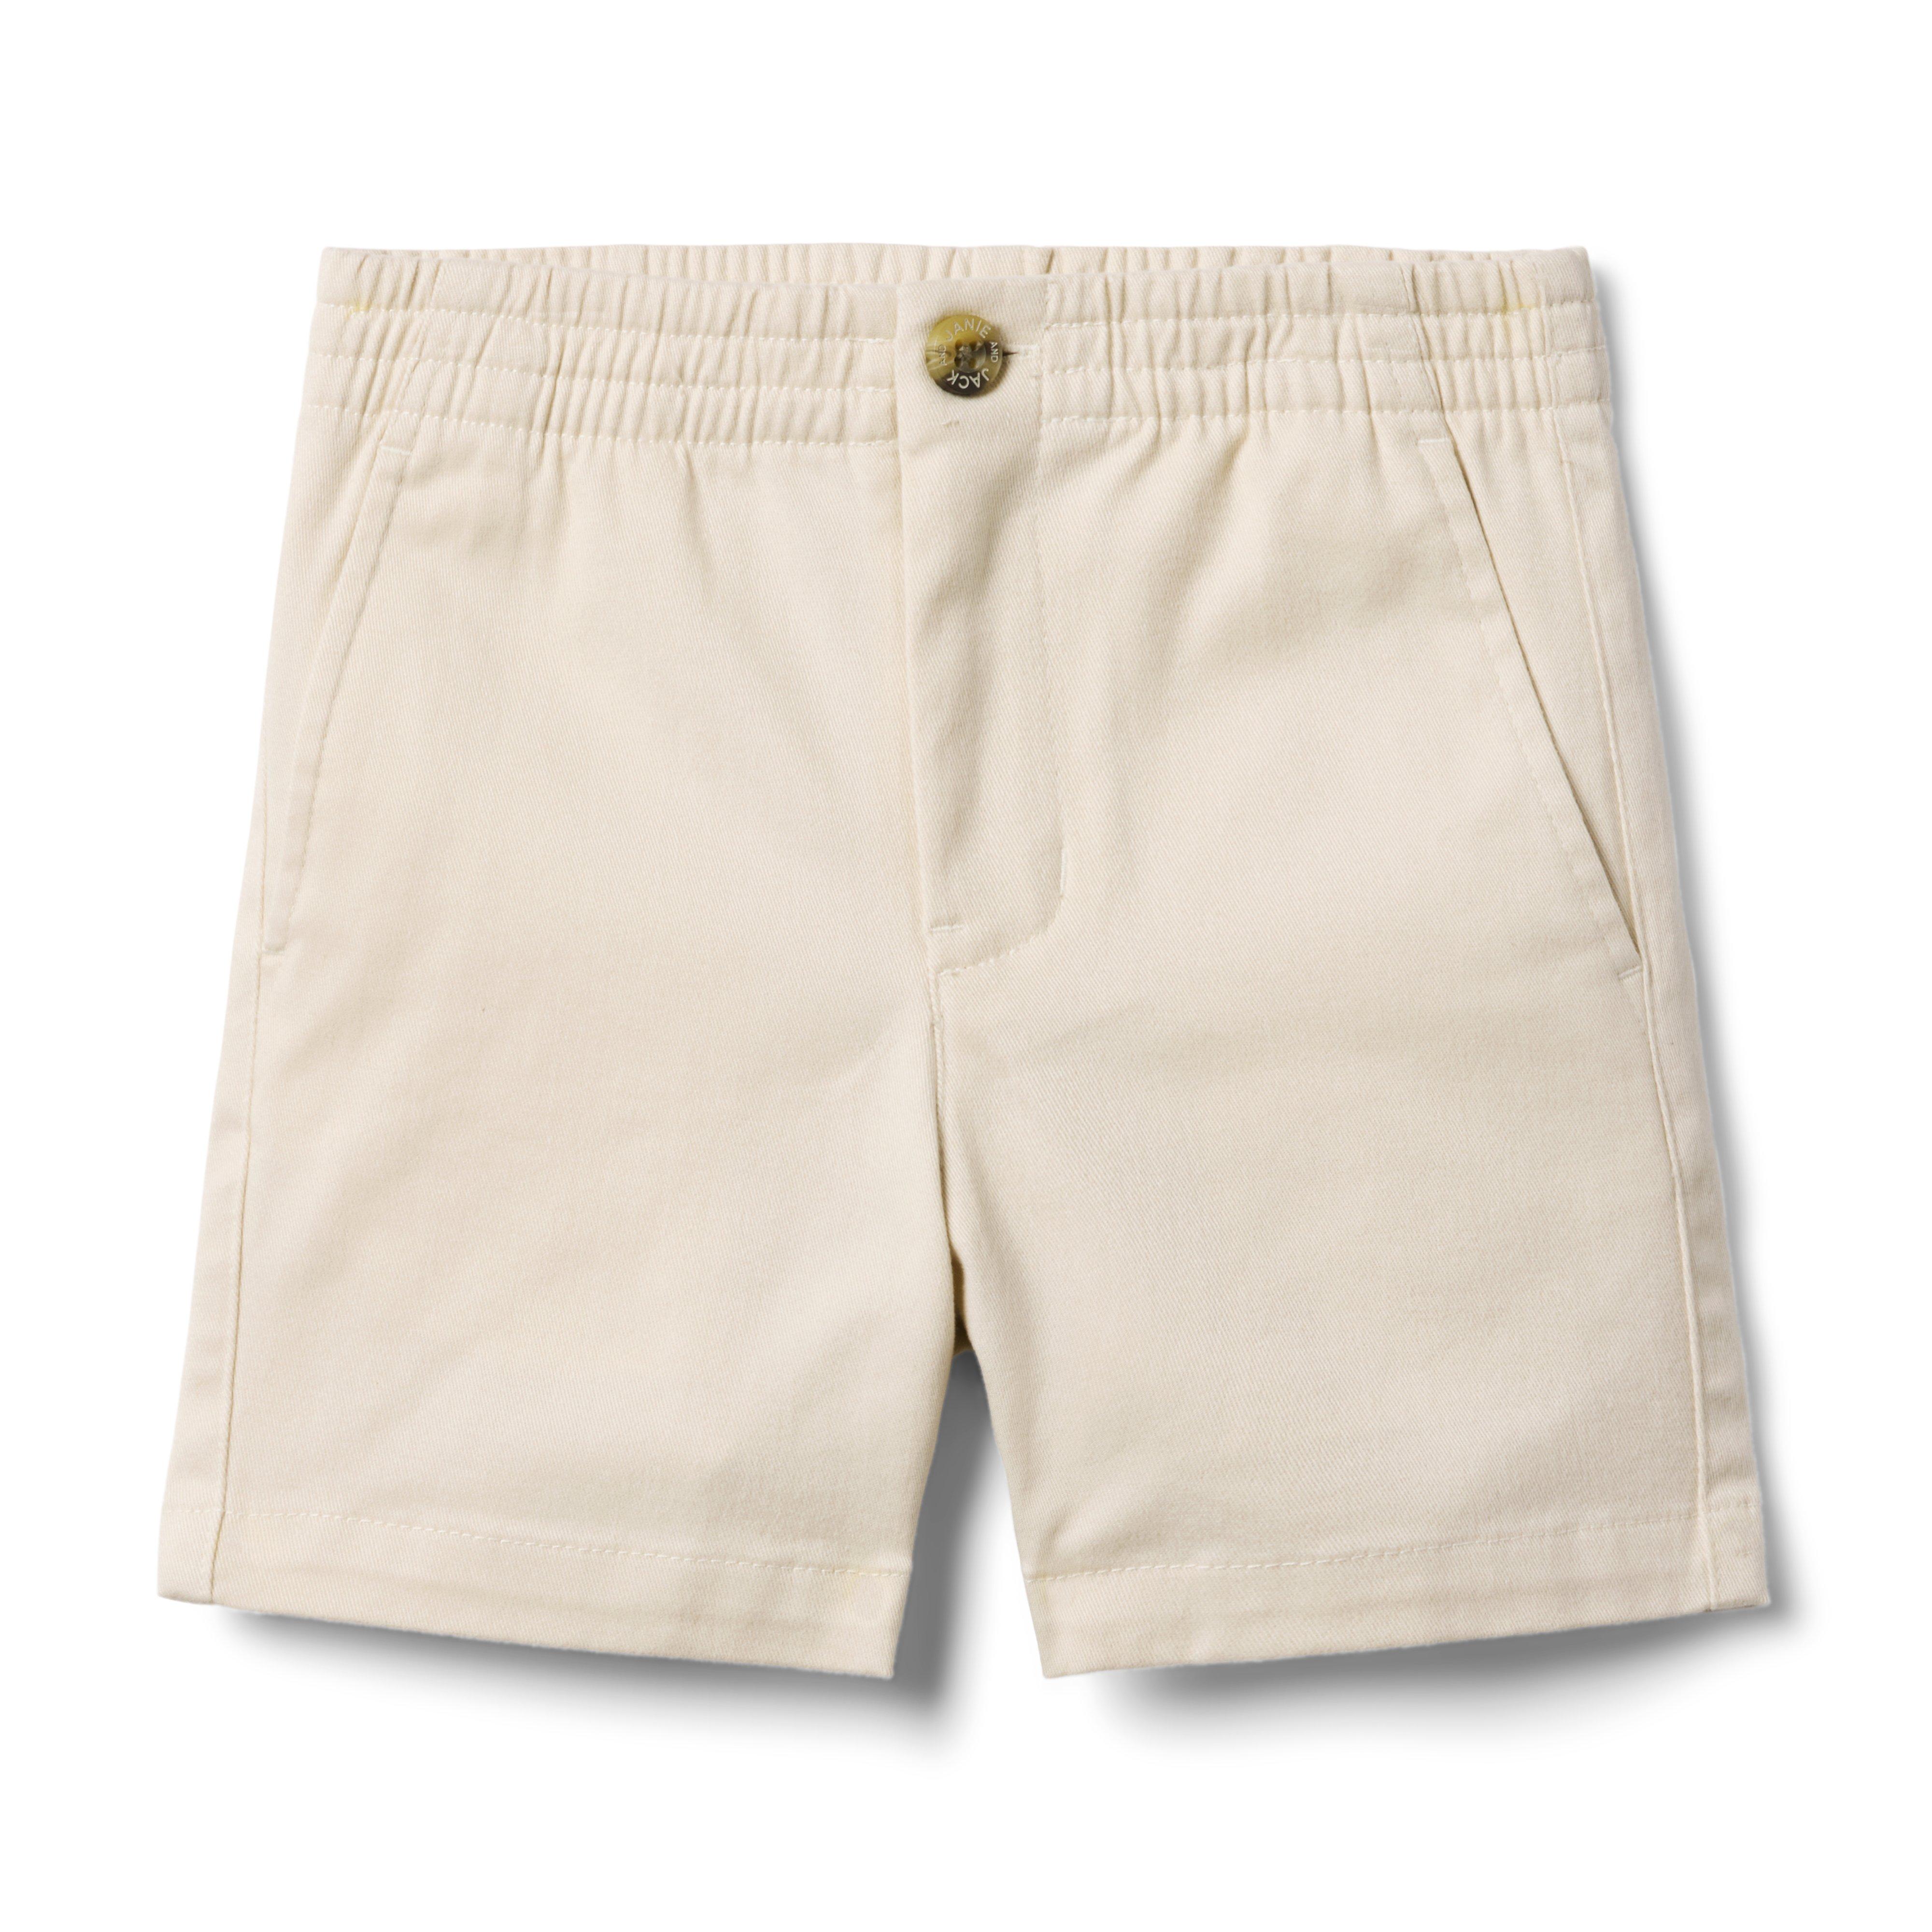 The Twill Pull-On Short